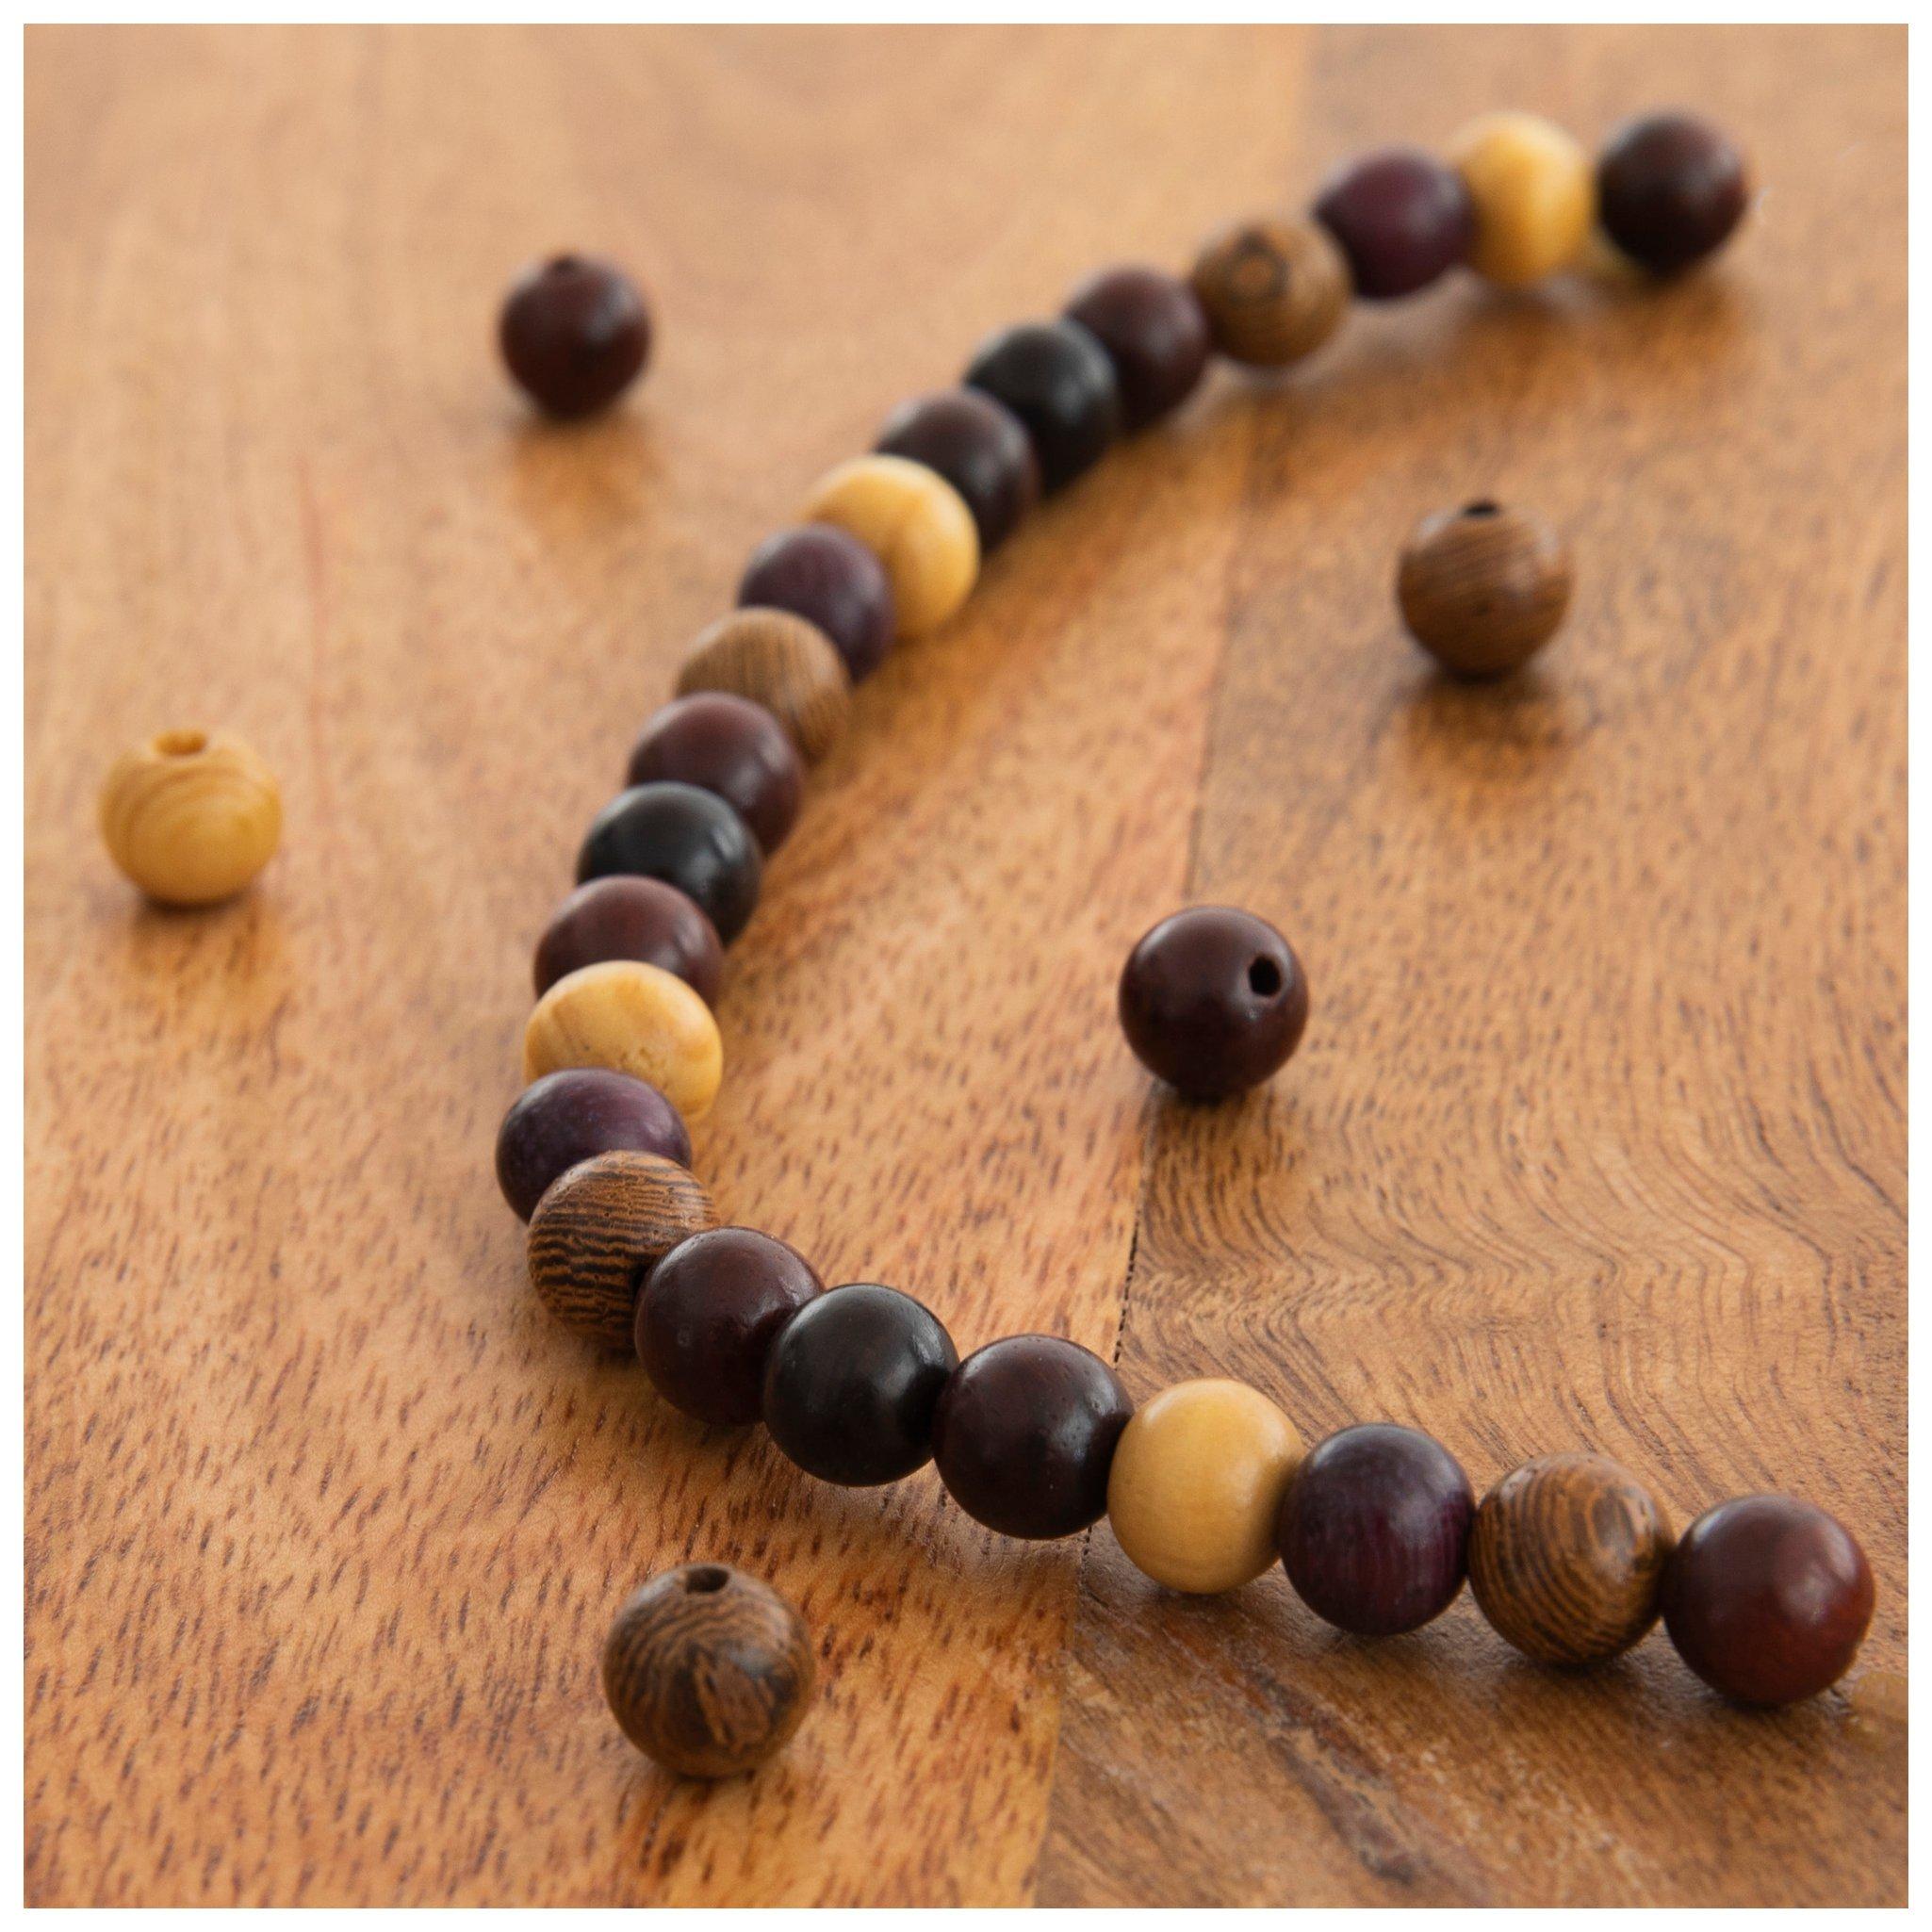 Wooden Circle Beads for Crafts in 7 Colors (2 Sizes, 300 Pieces), PACK -  Harris Teeter